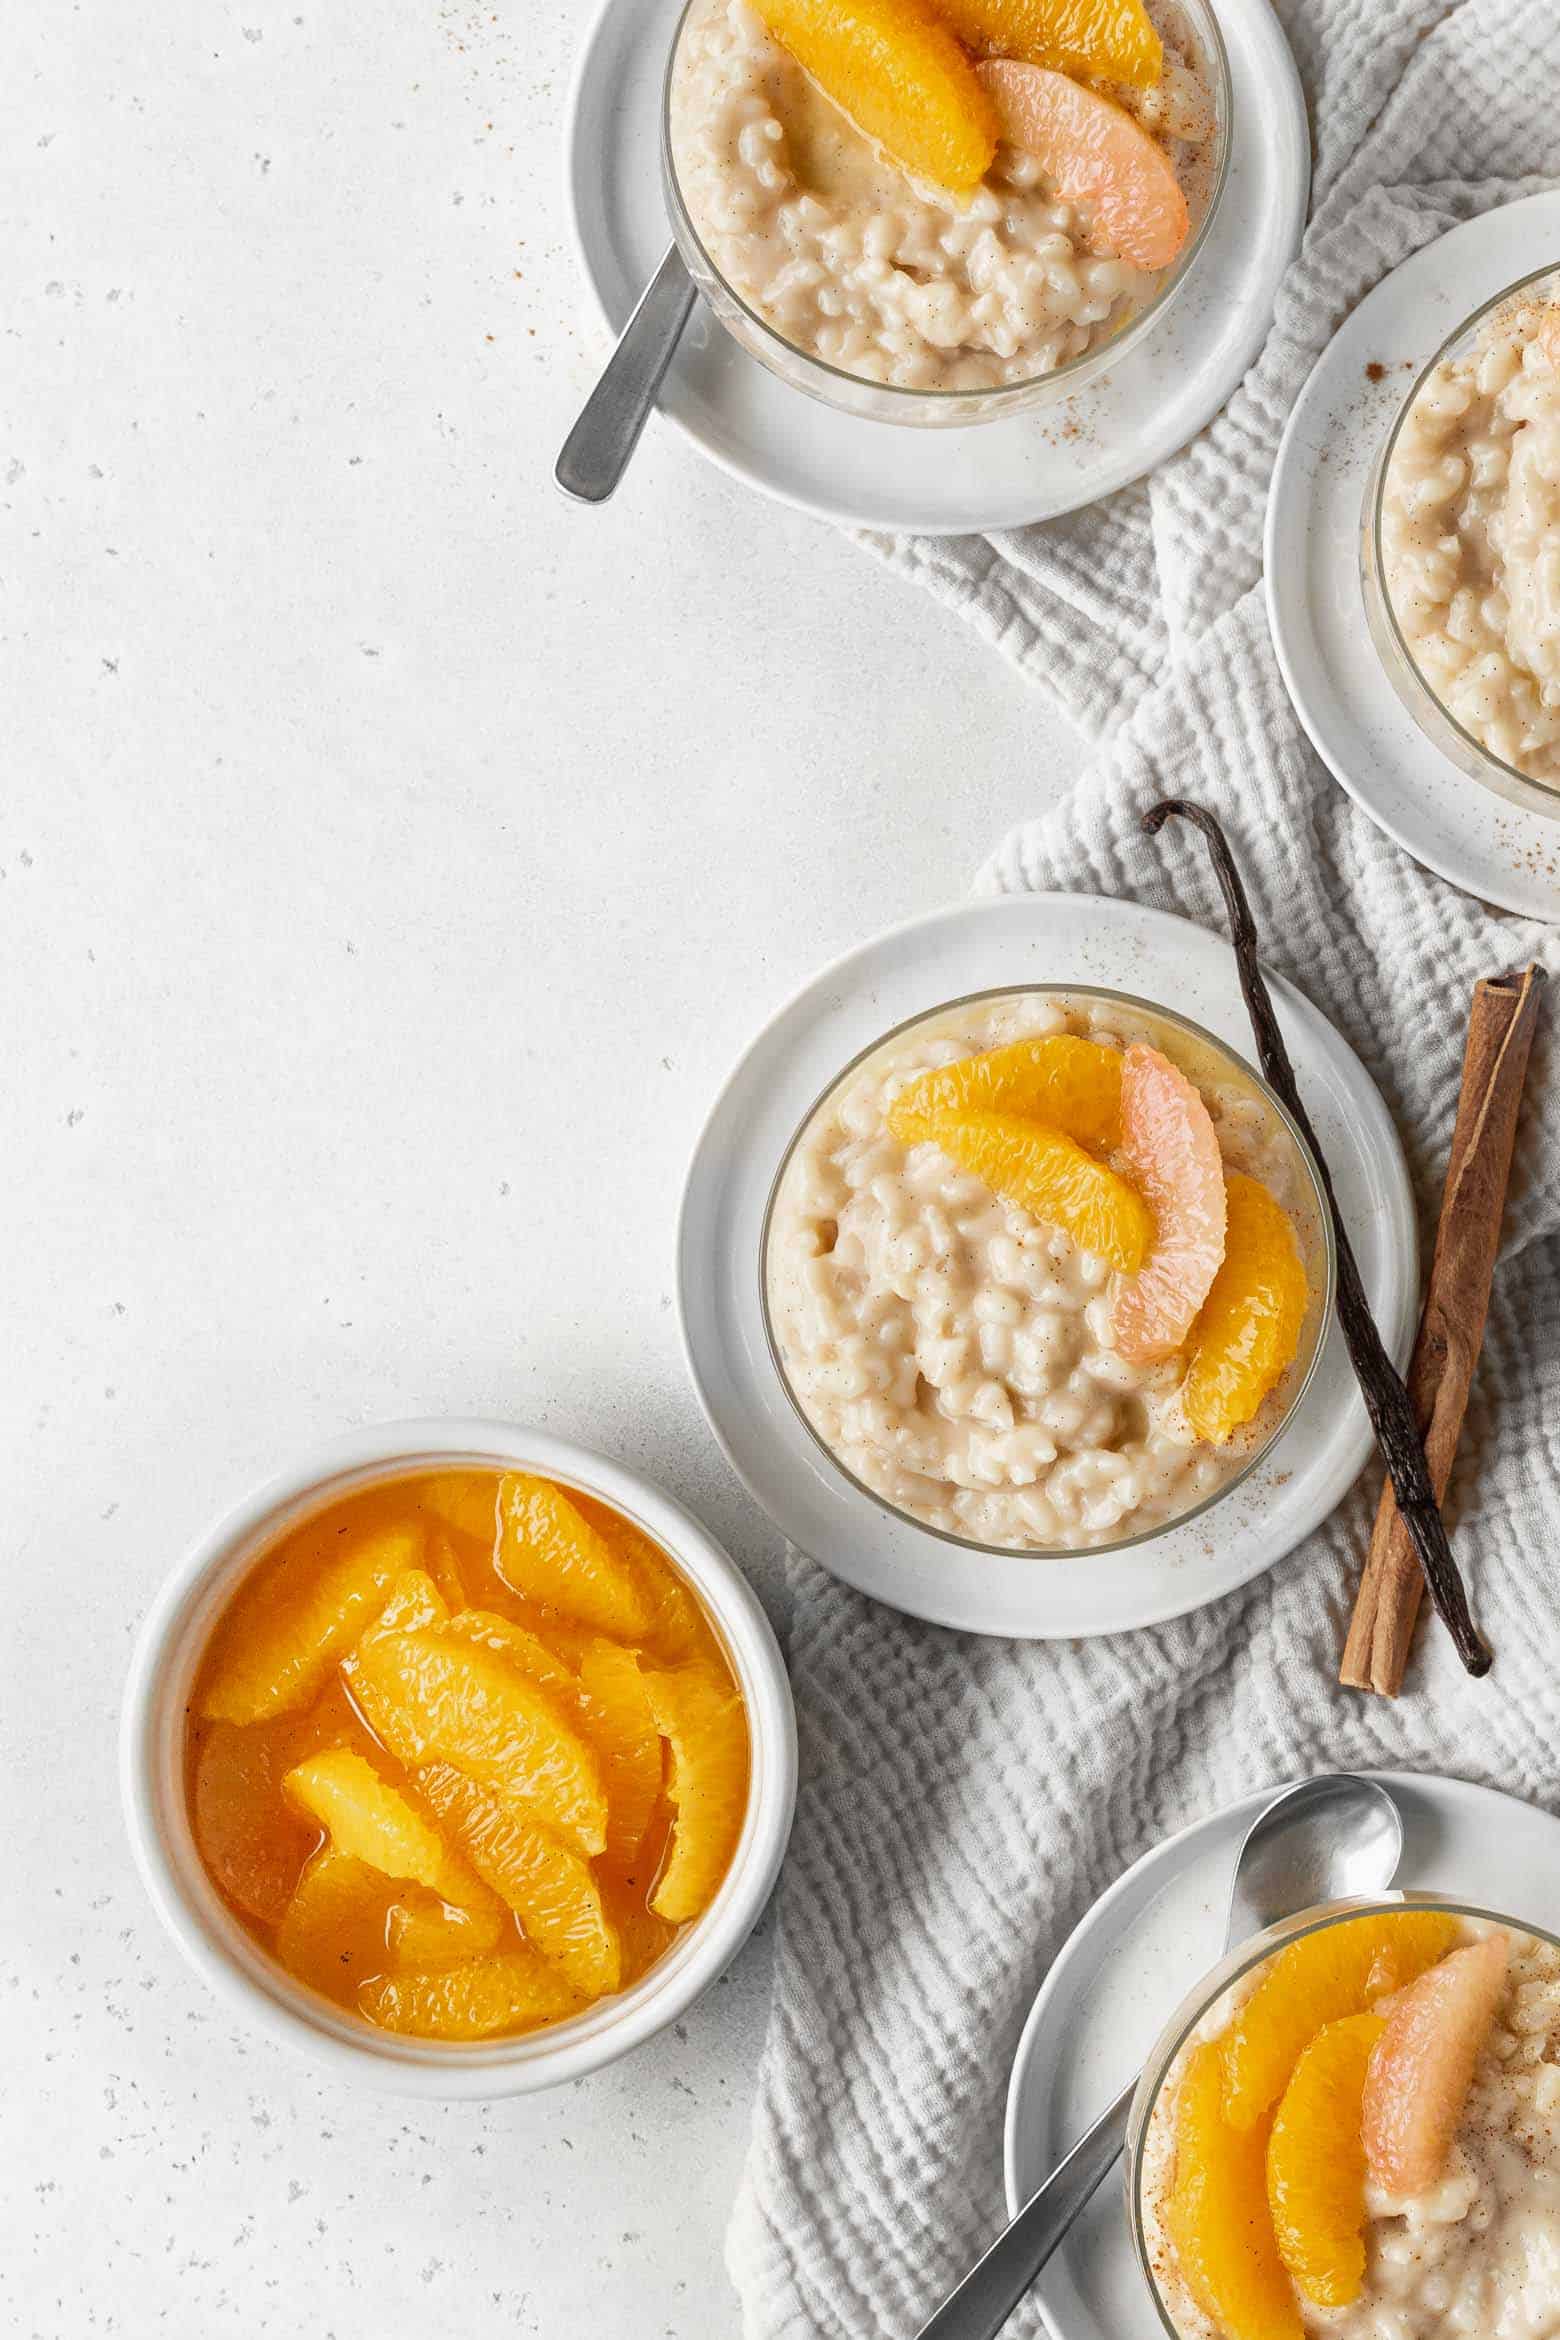 Bowls of rice pudding topped with oranges